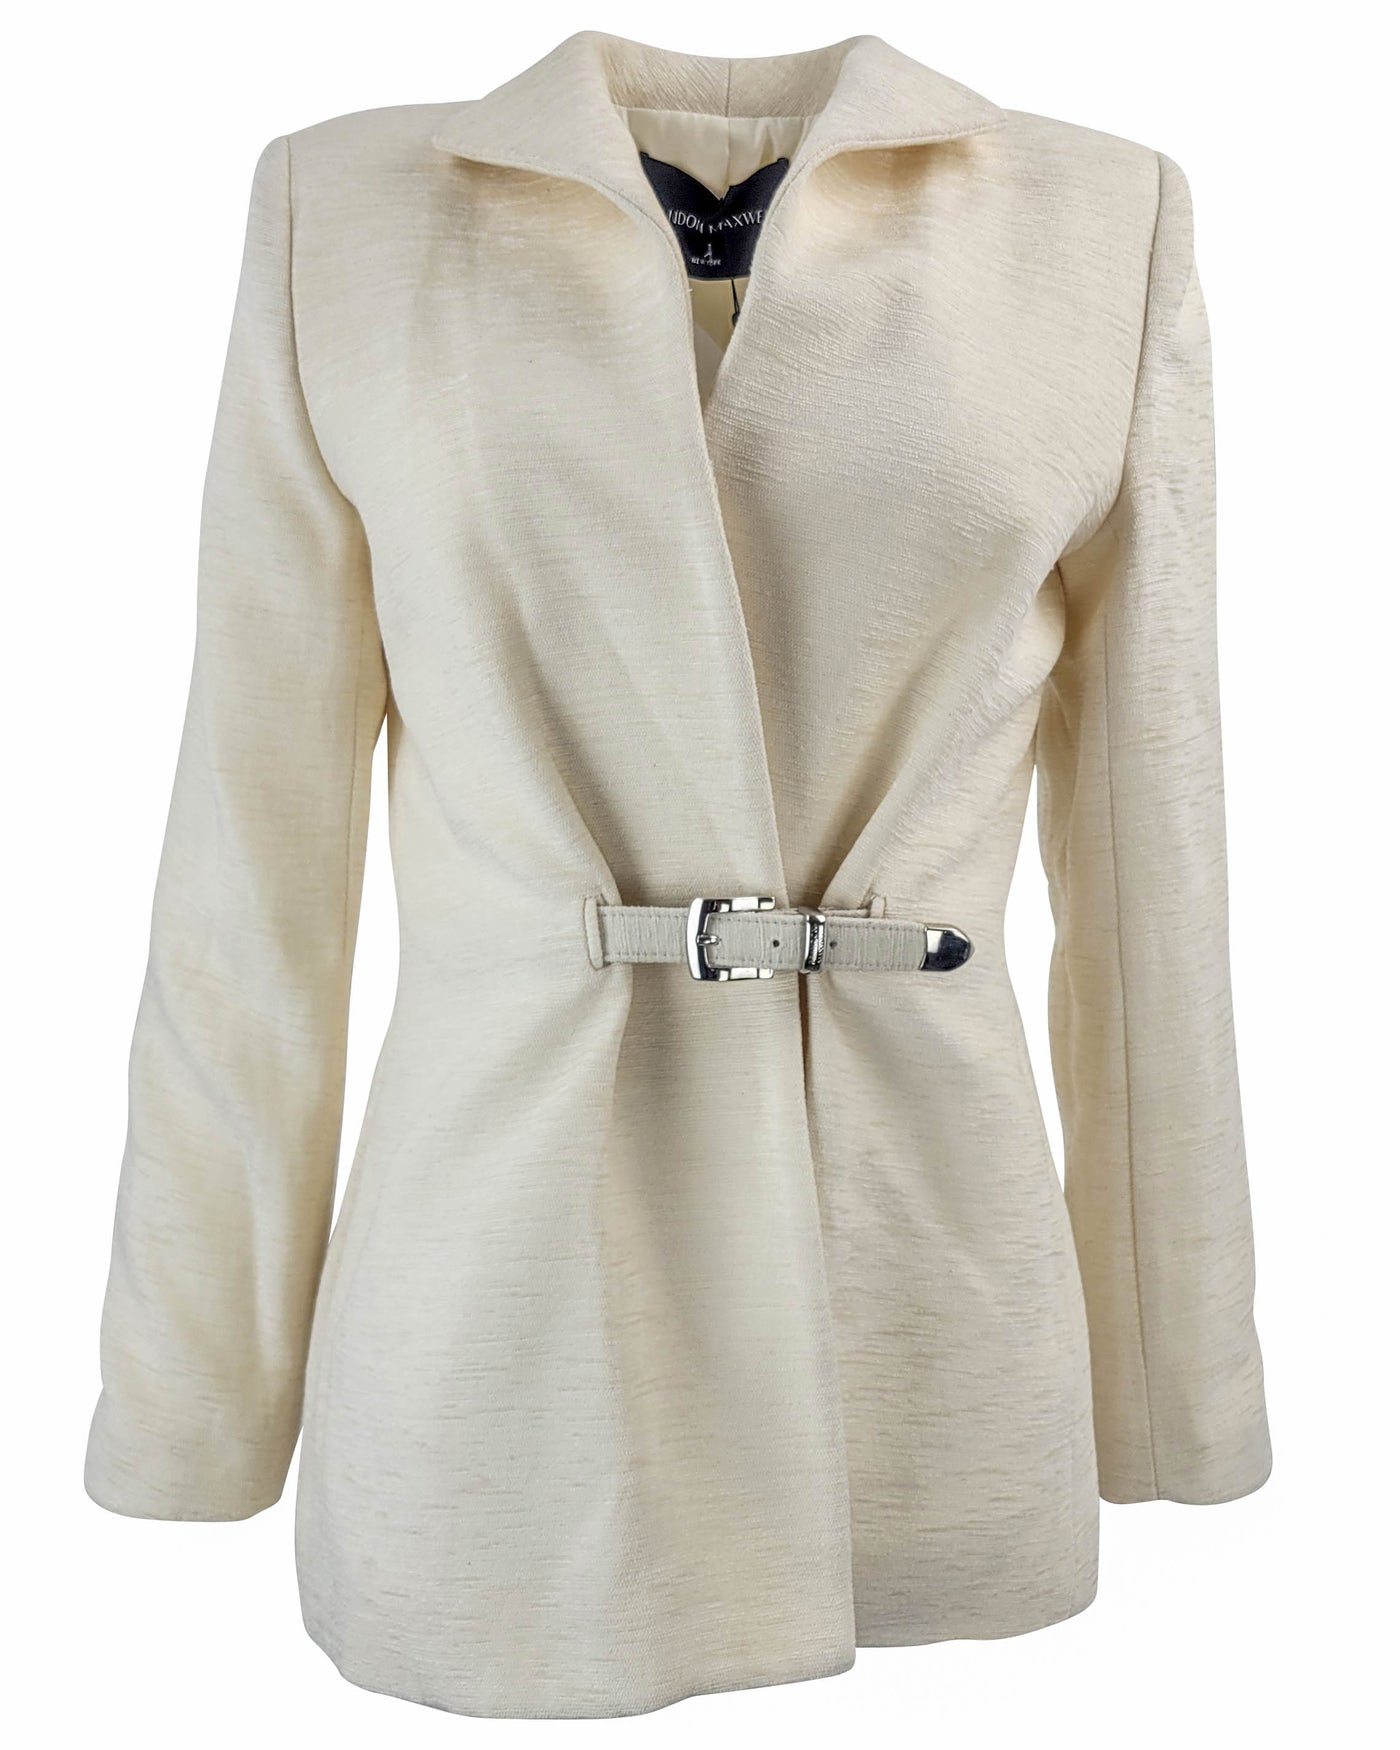 Brandon Maxwell Belted Blazer in Antique White - Discounts on Brandon Maxwell at UAL